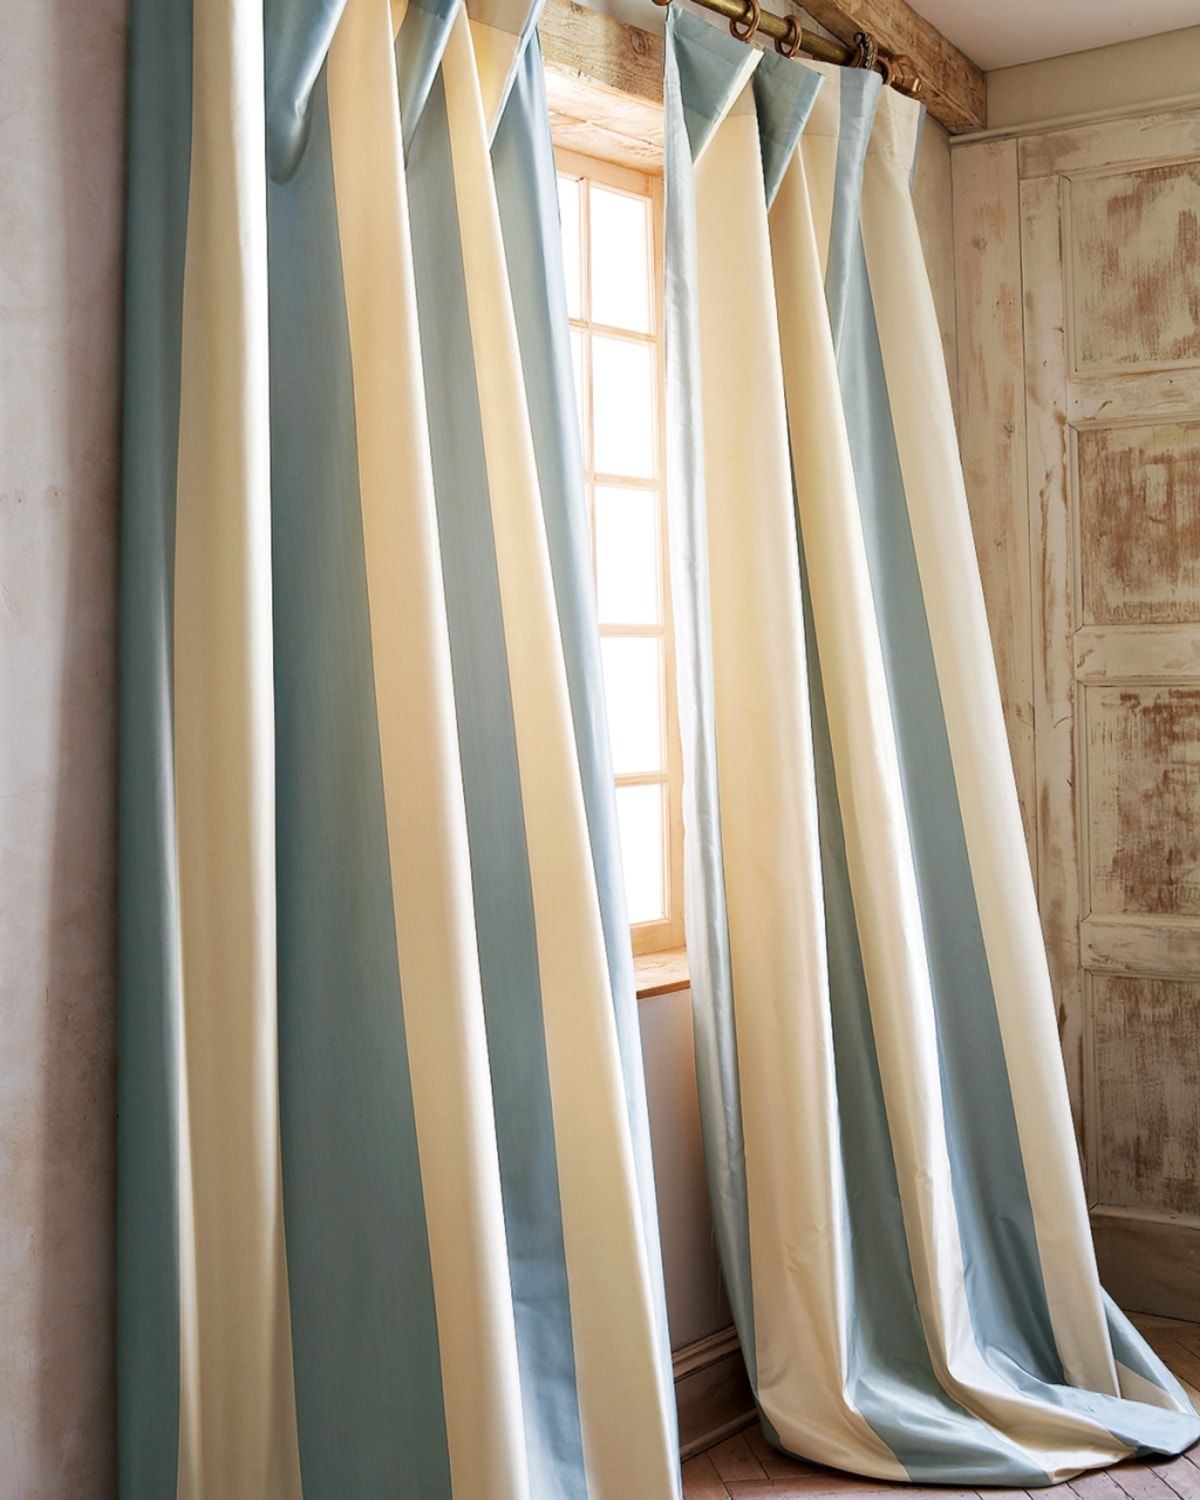 Elegant Stripes: Elevate Your Space with Striped Curtains